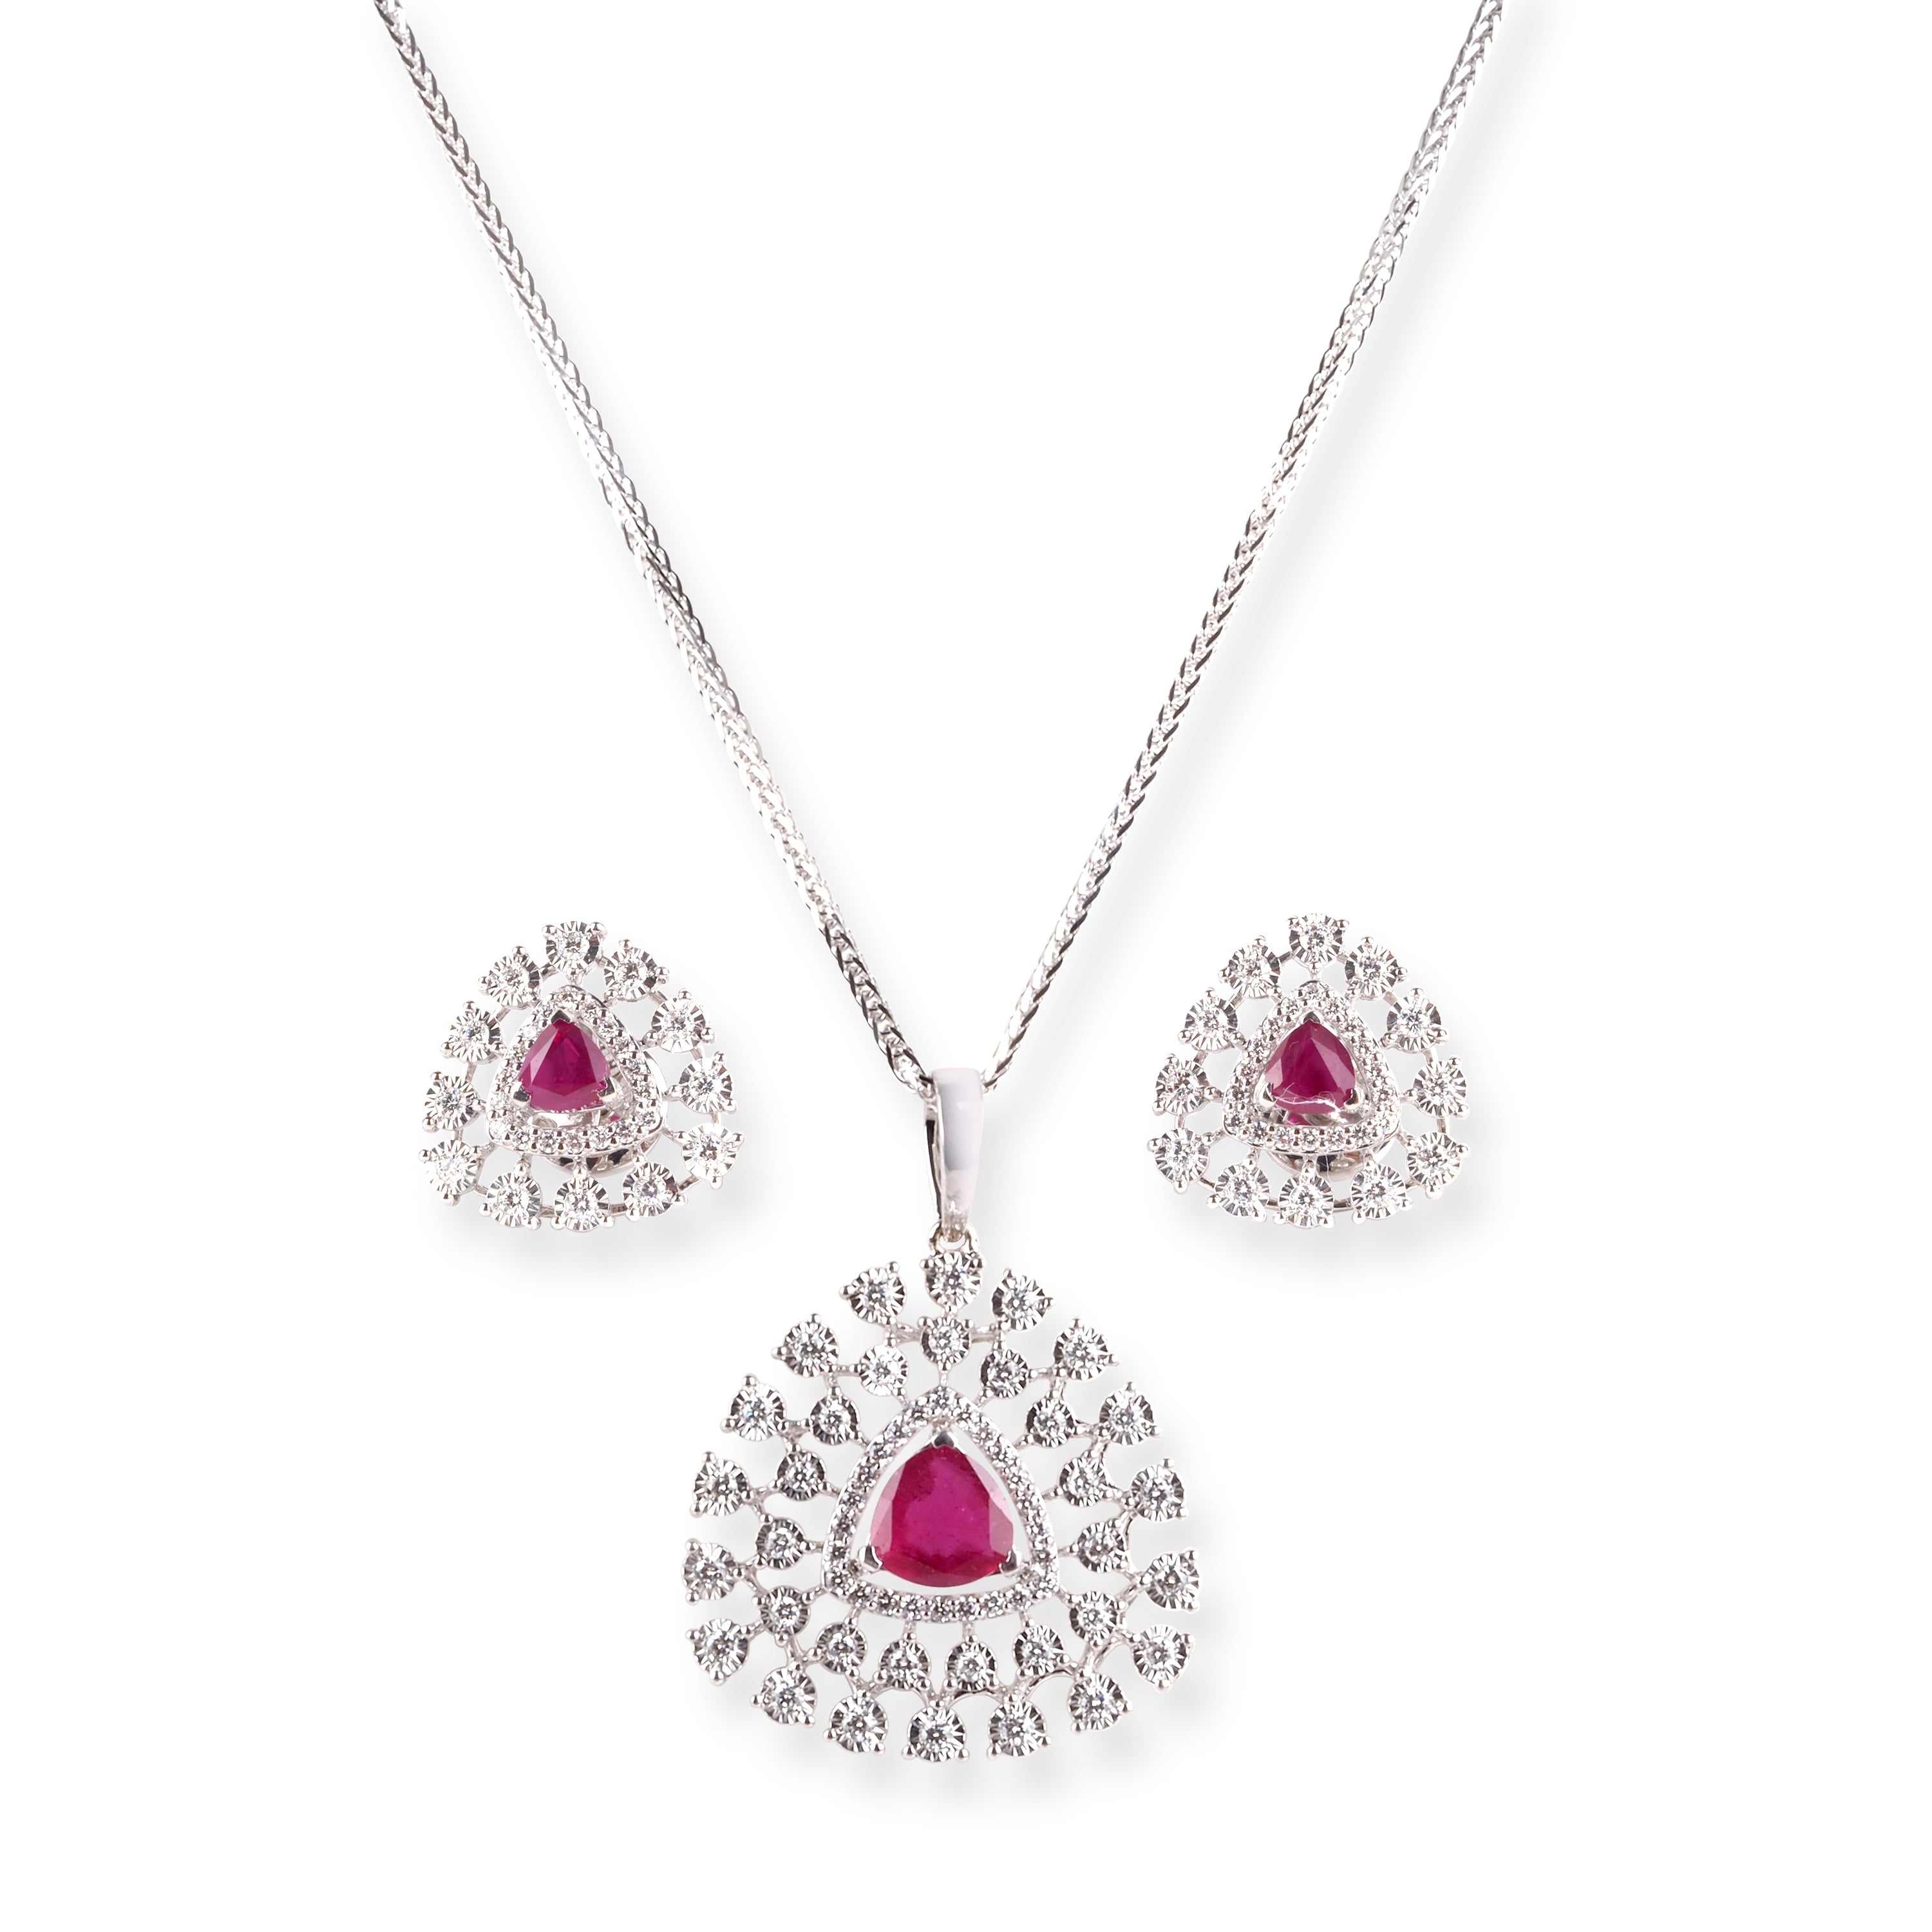 18ct White Gold Diamond and Ruby Pendant Suite C-7048a MCS7689 MCS7690